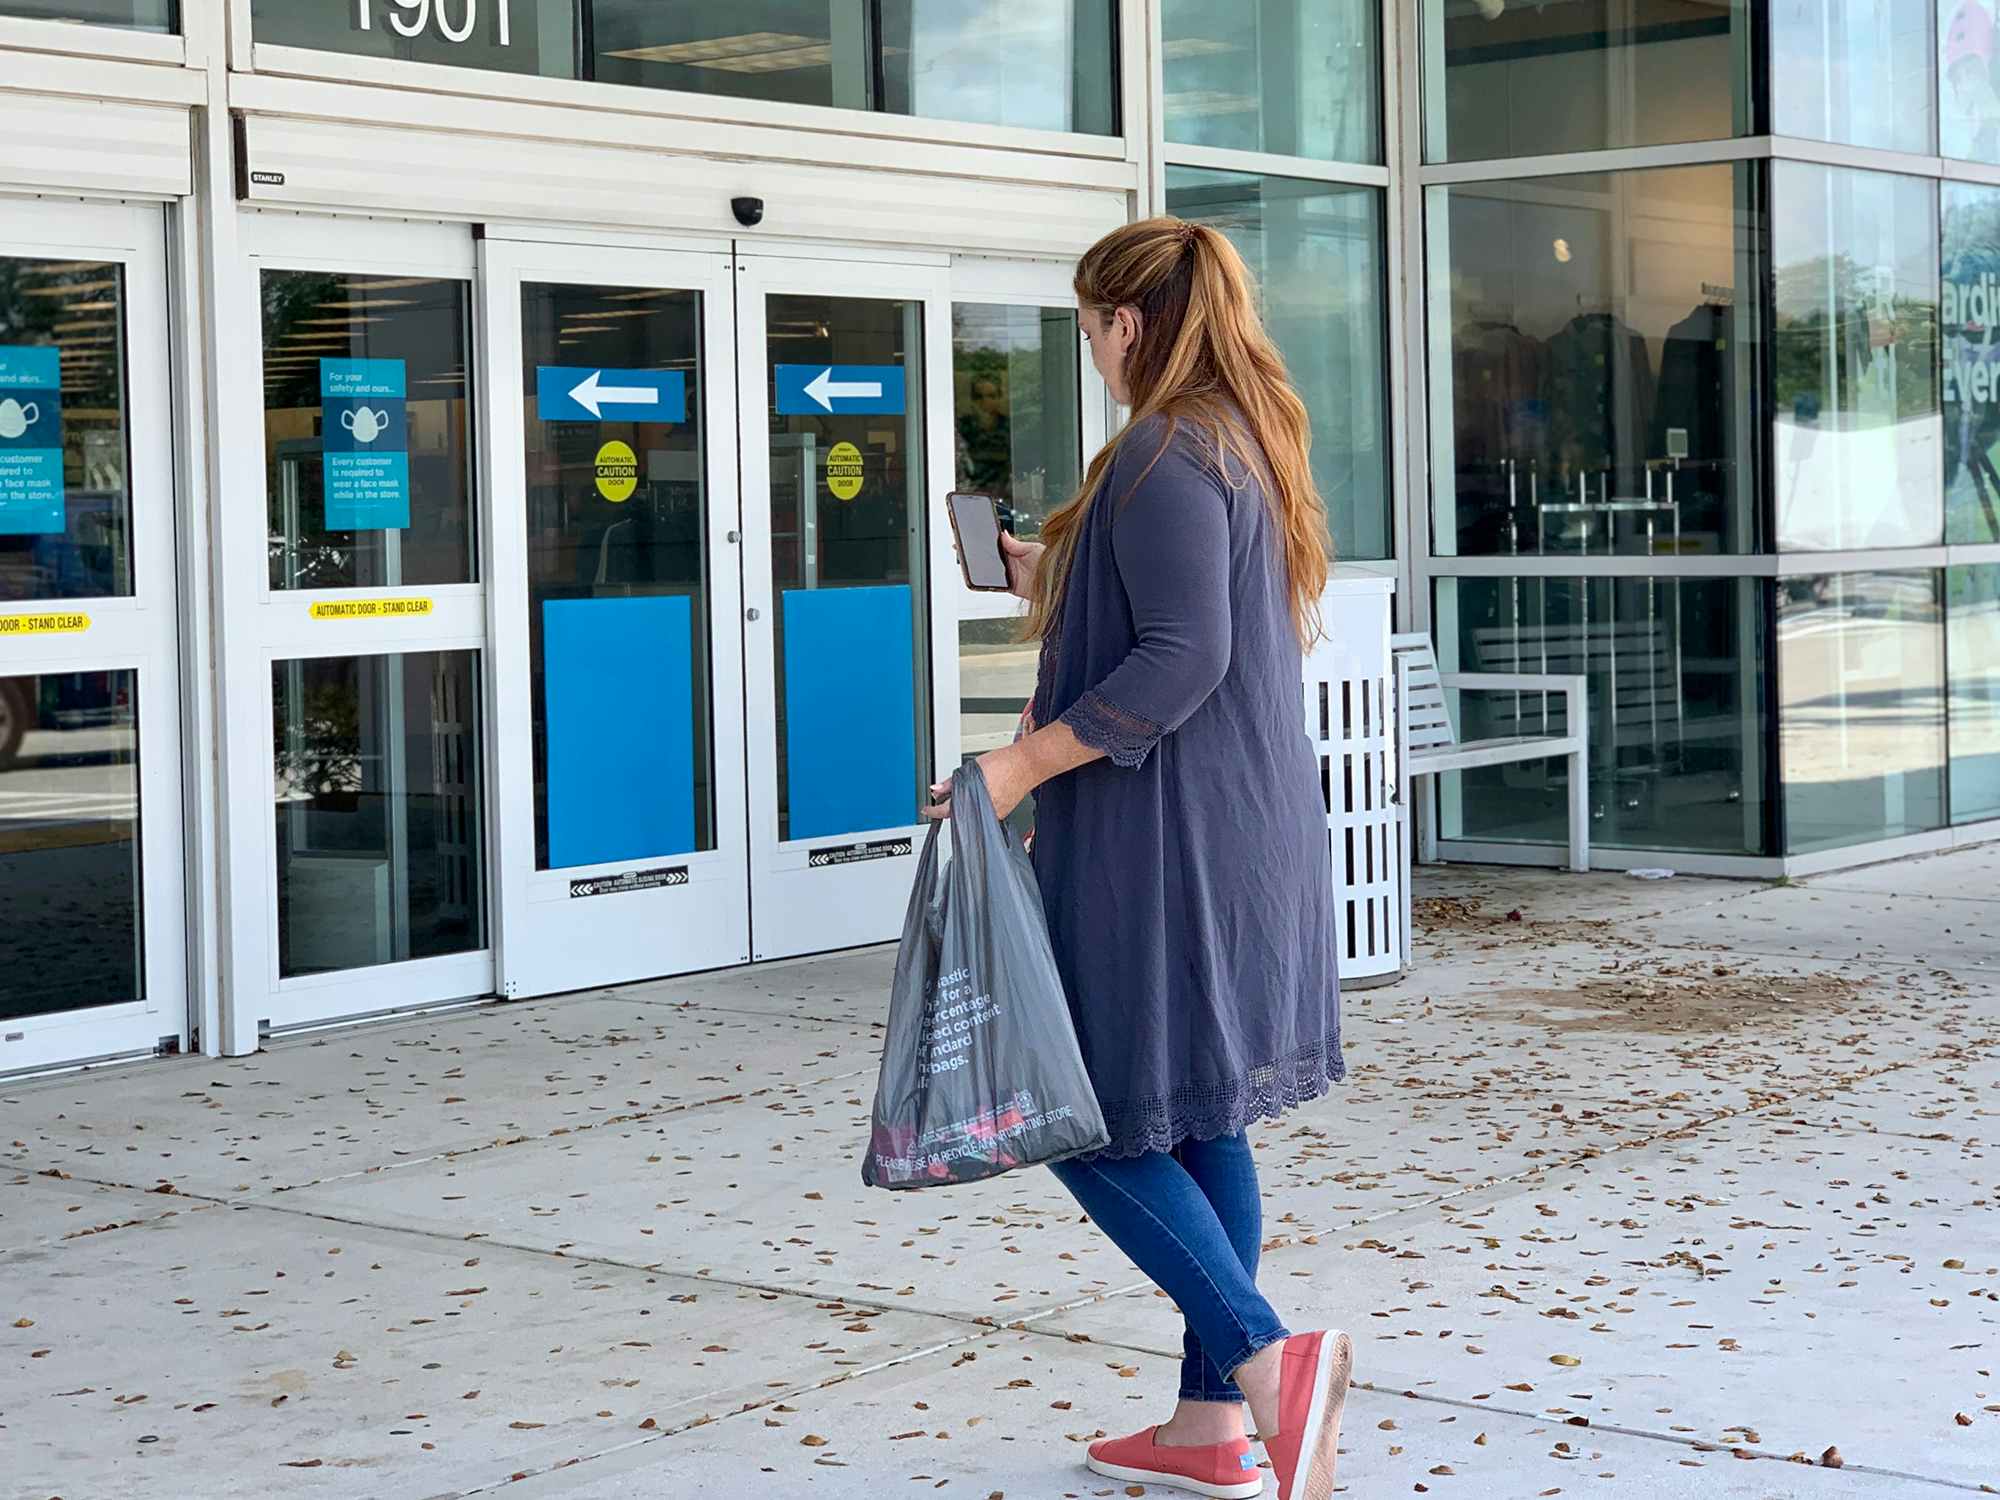 KOHL'S UP TO 85% * OFF SALE! STORE WALKTHROUGH JUNE 2020 